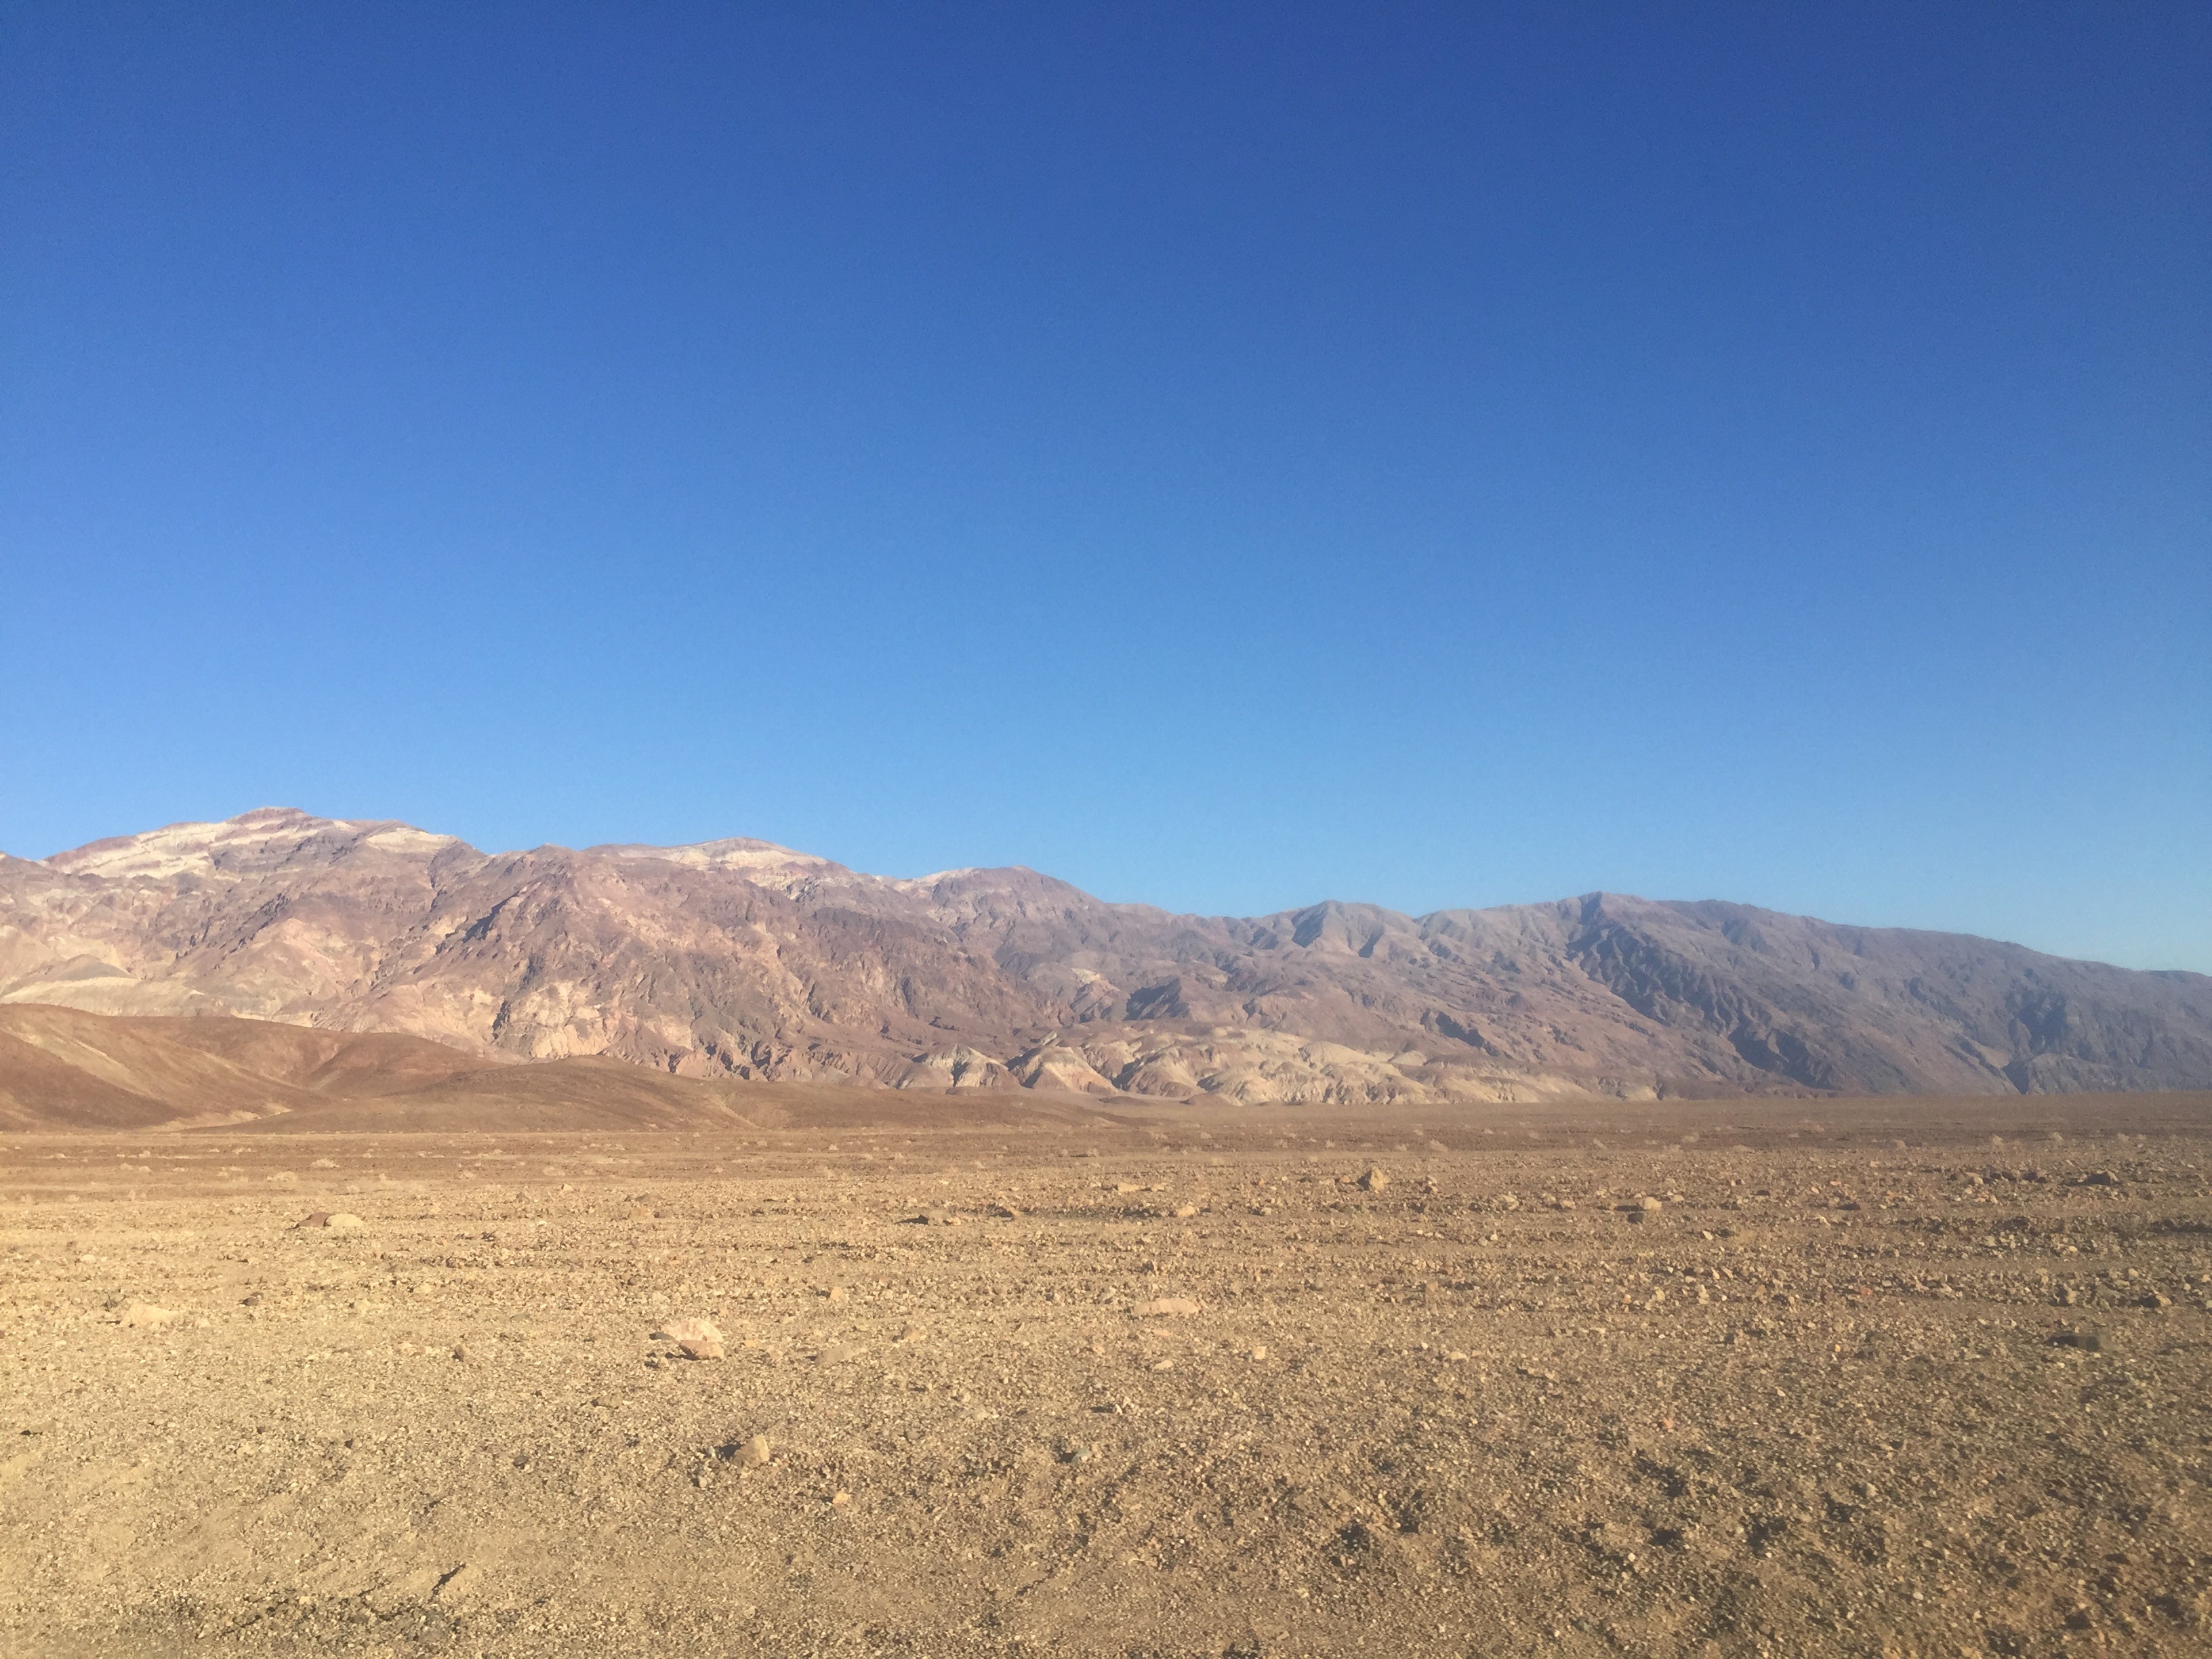 Camper submitted image from Tecopa Hot Springs Resort - 2